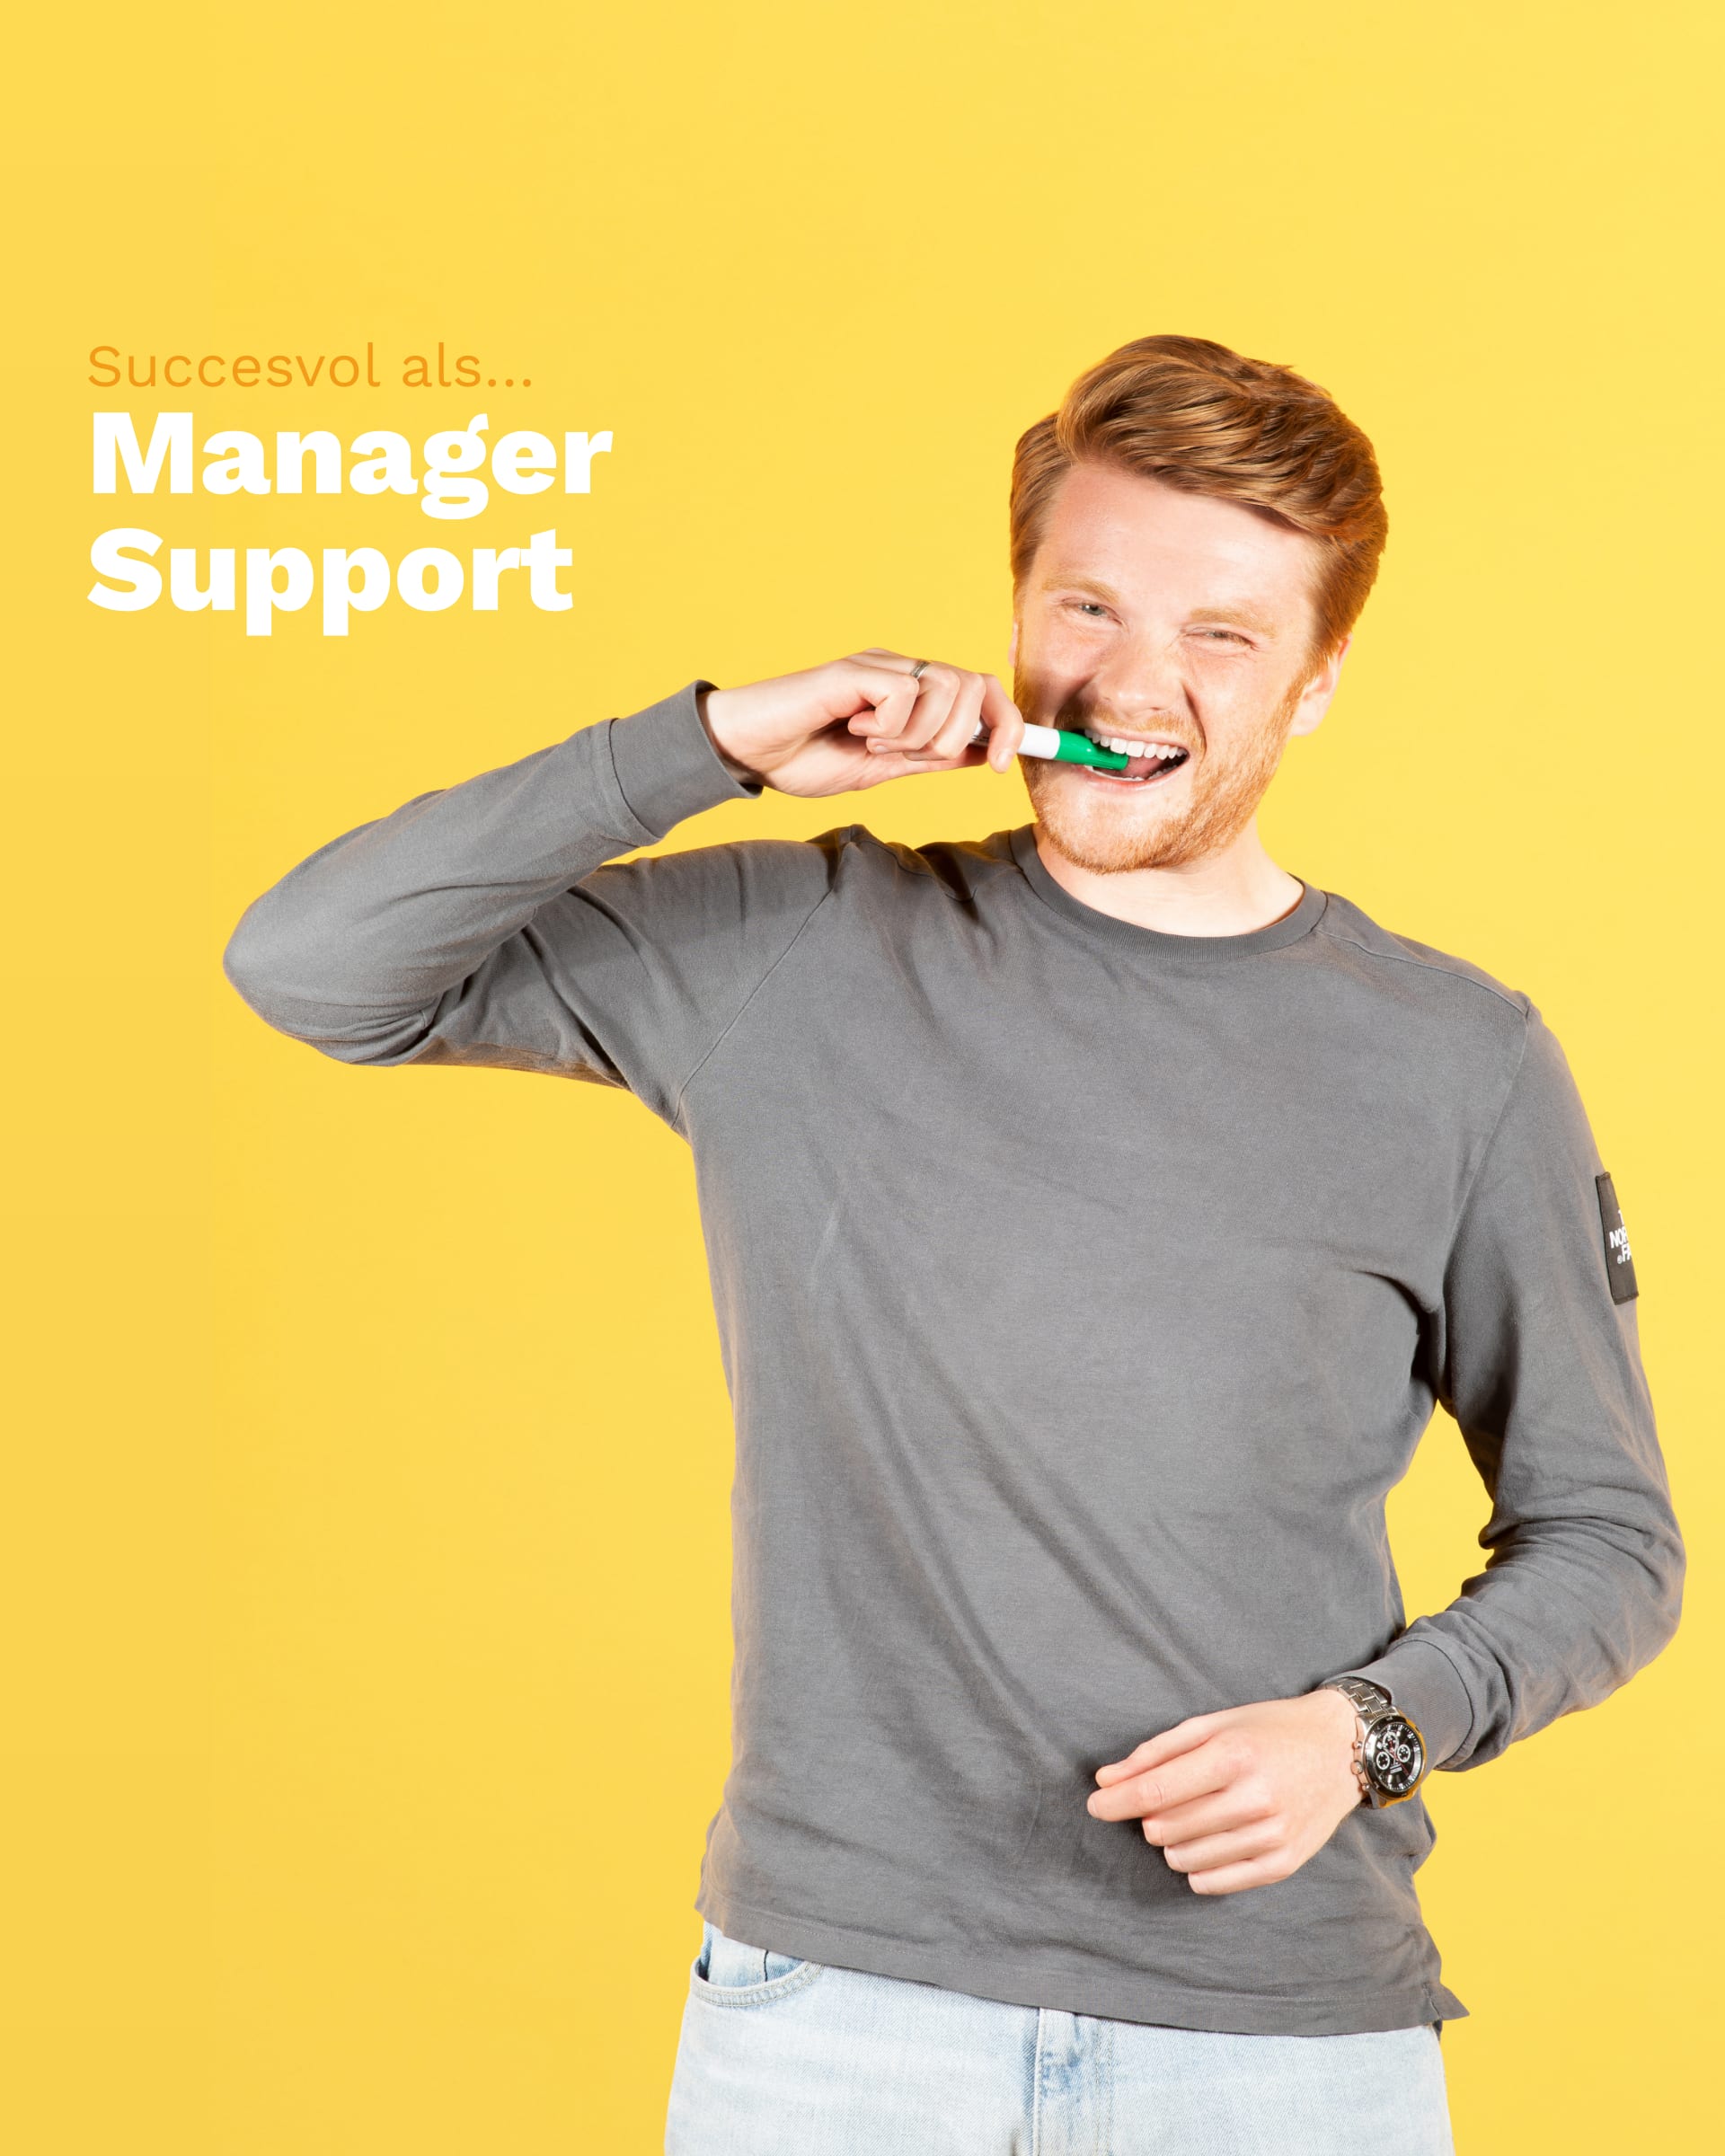 Jim - Manager Support